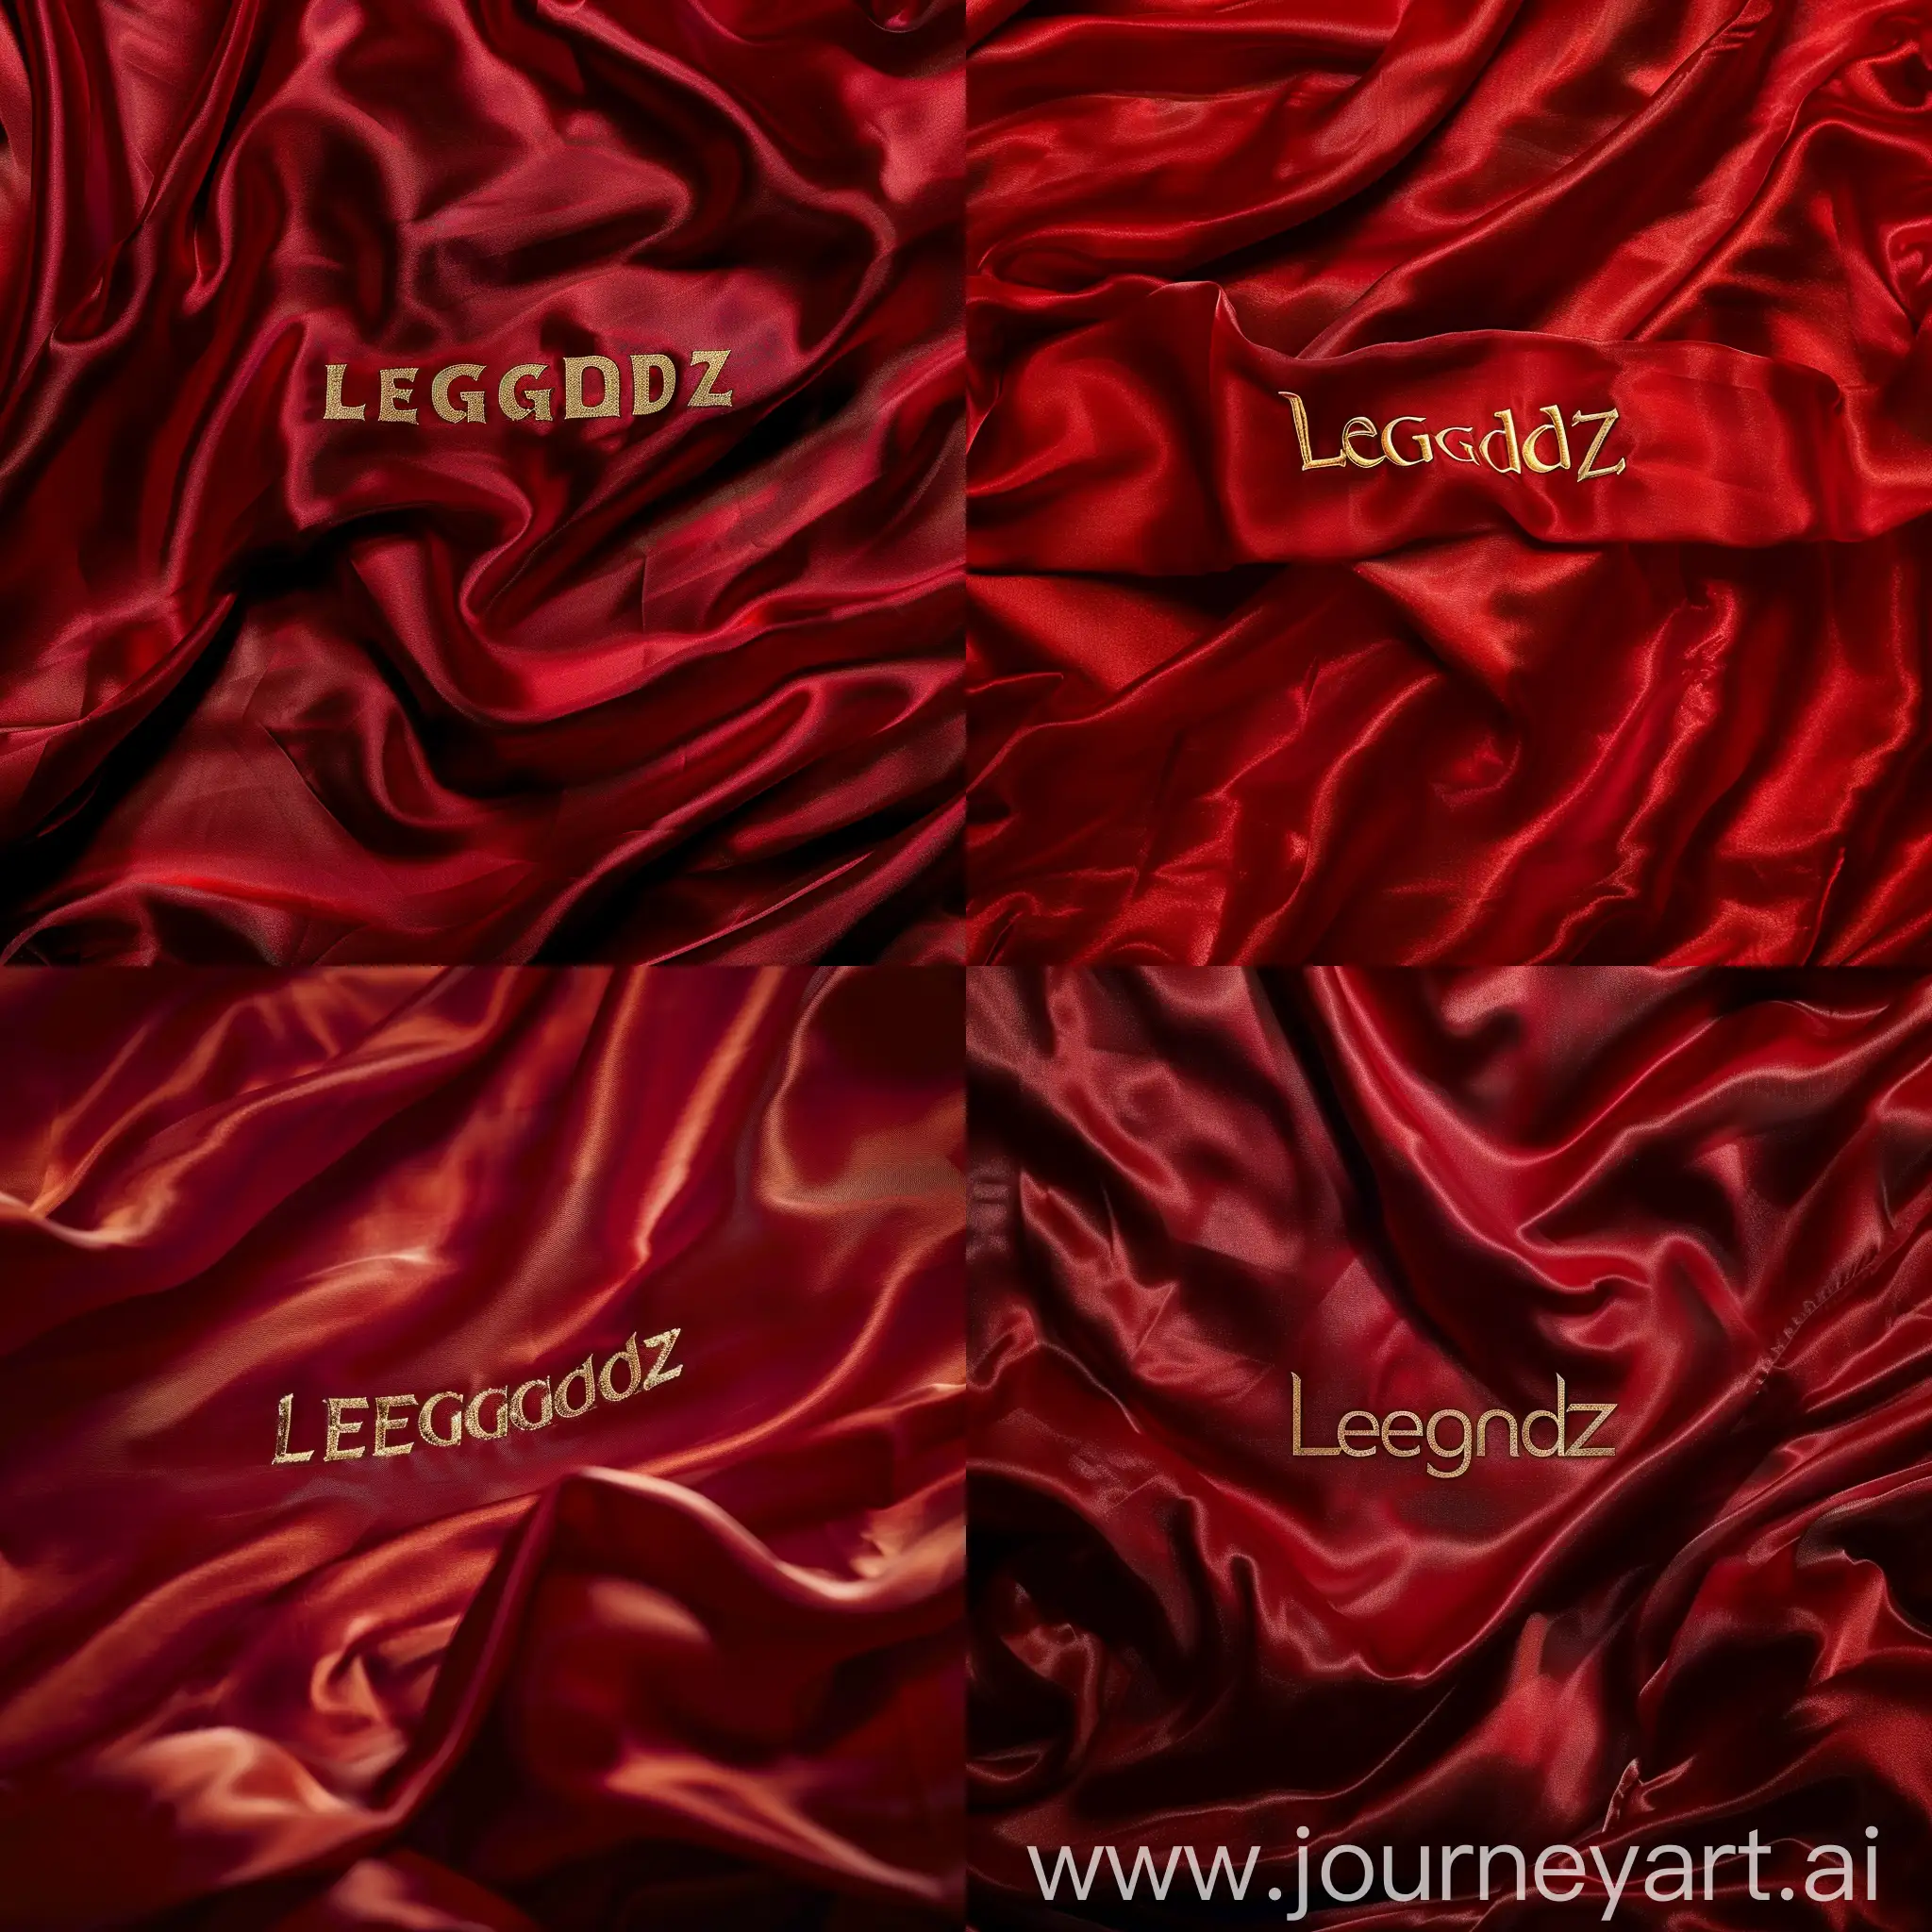 Dynamic-Red-Silk-Banner-with-Legendz-in-Gold-Letters-Fluttering-in-the-Wind